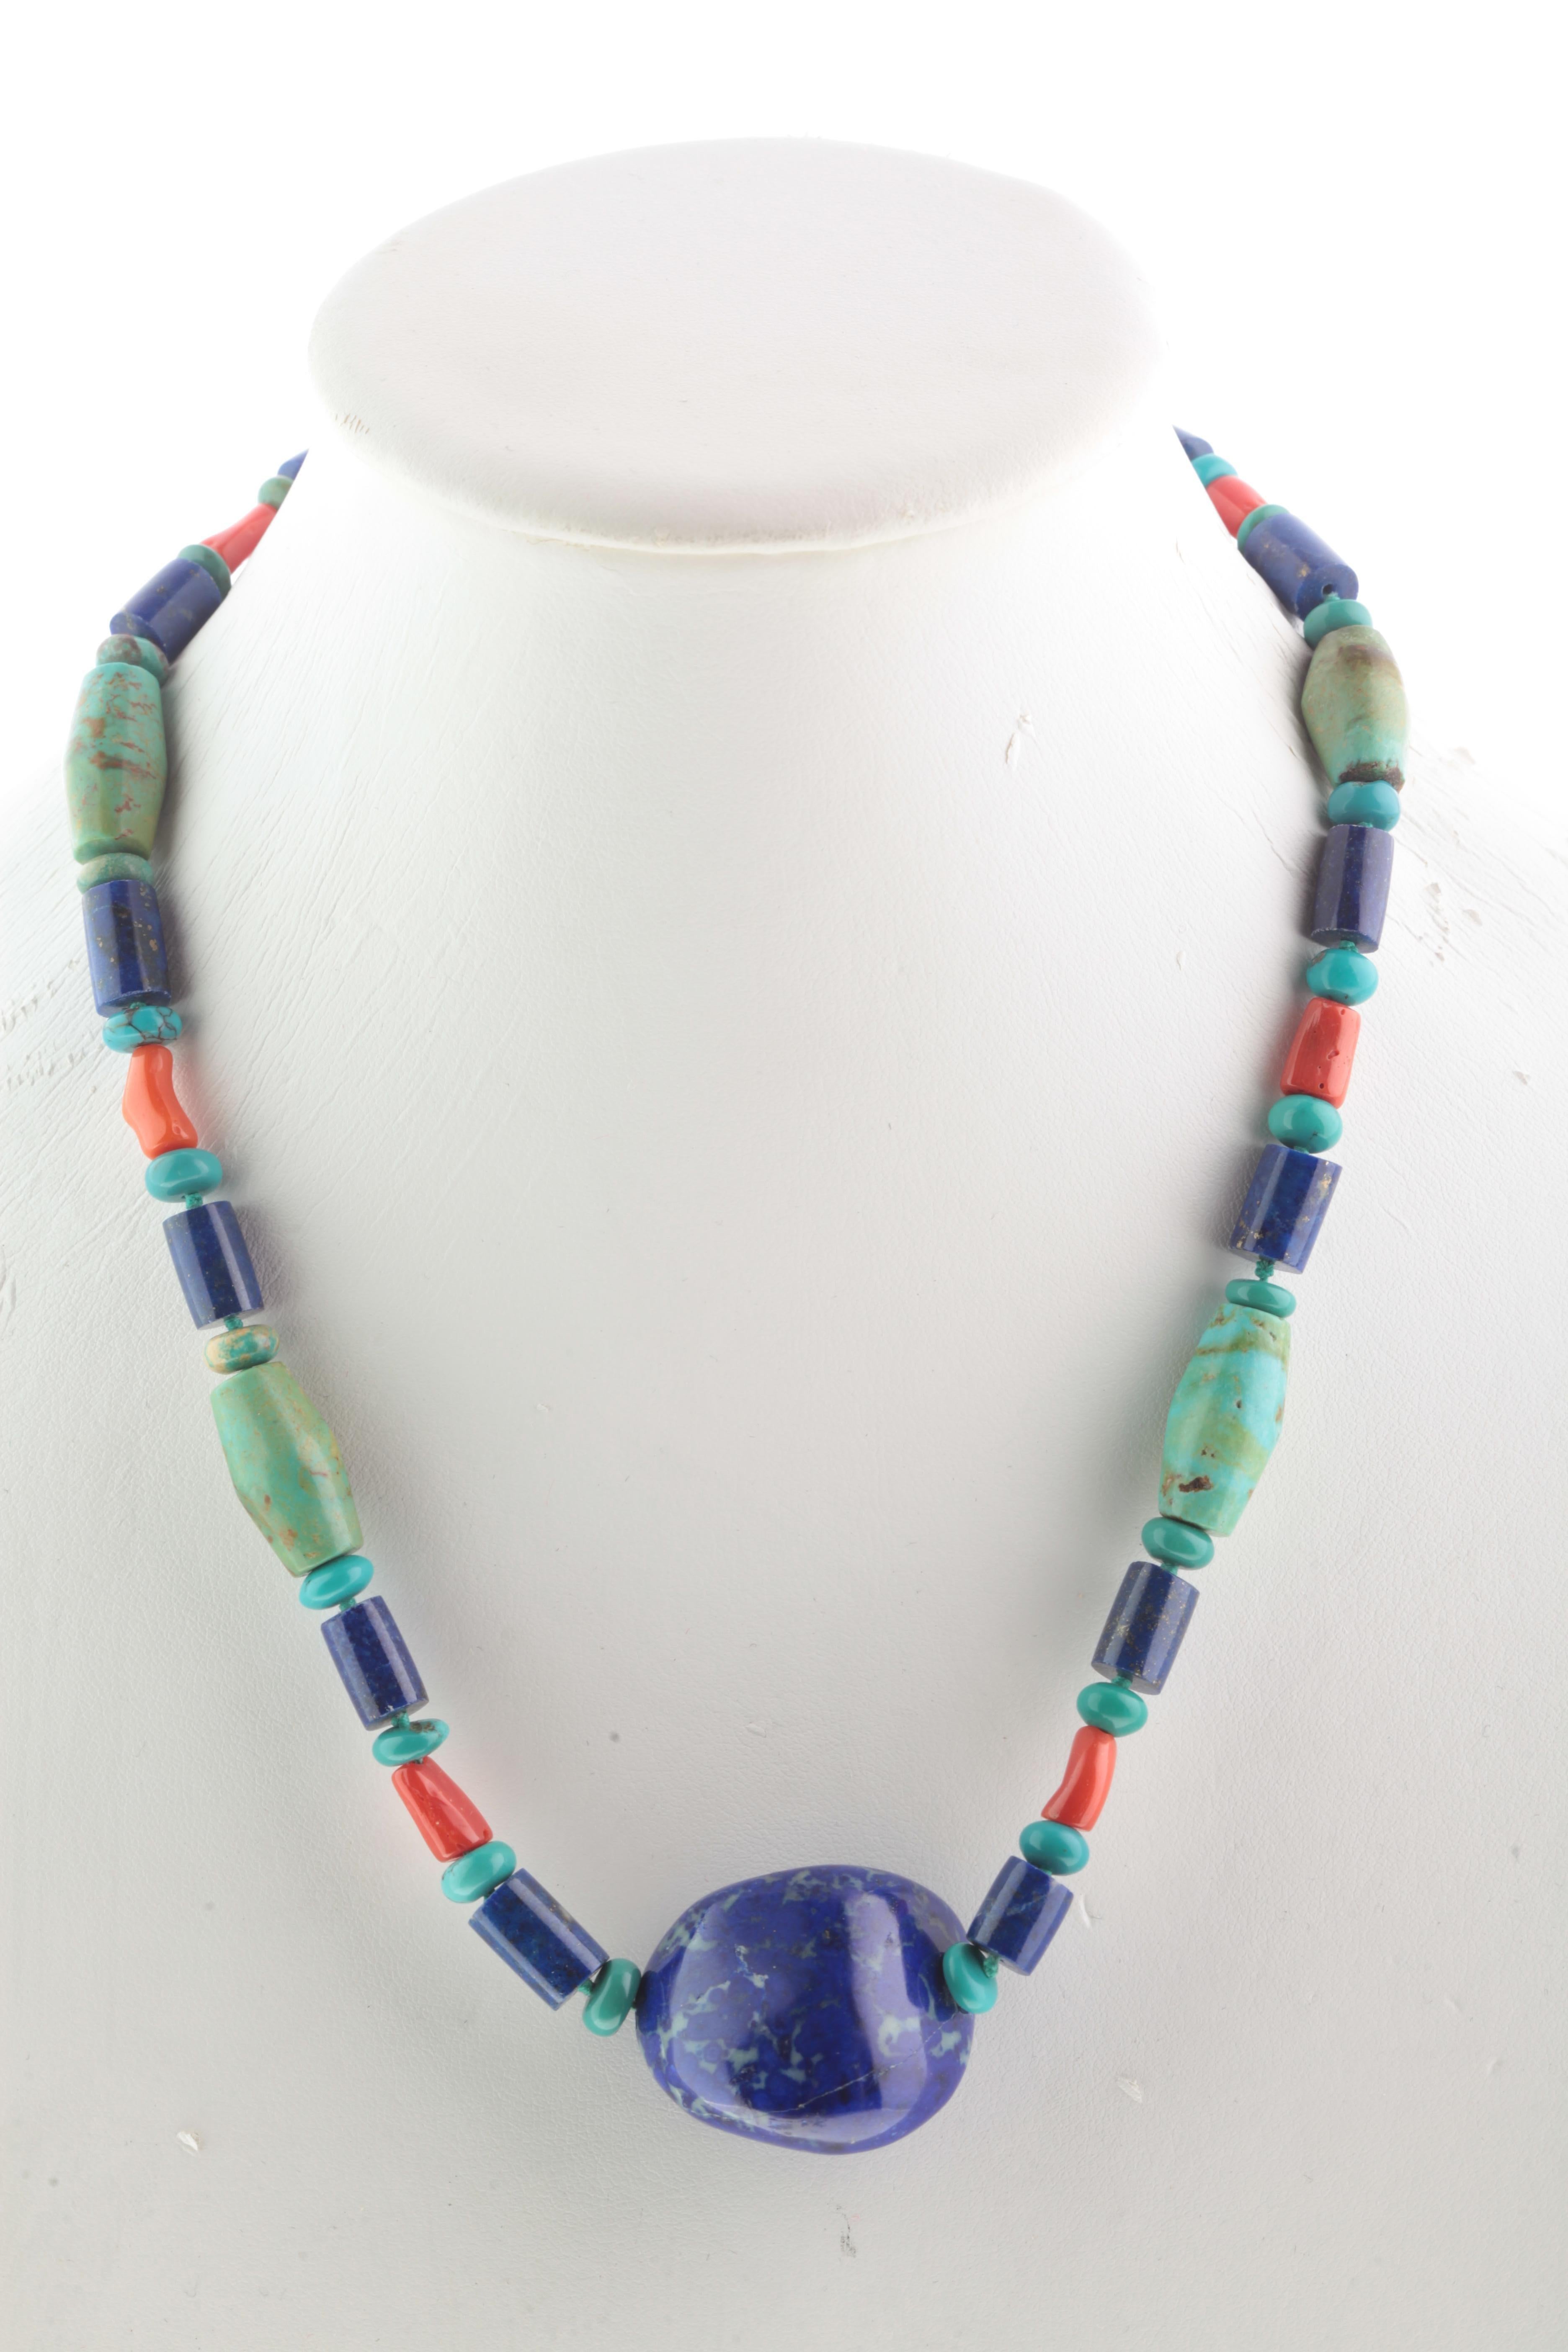 Anglo-Indian Lapis Lazuli Turquoise Coral Handmade Silver Tribal Warrior Bold Necklace For Sale